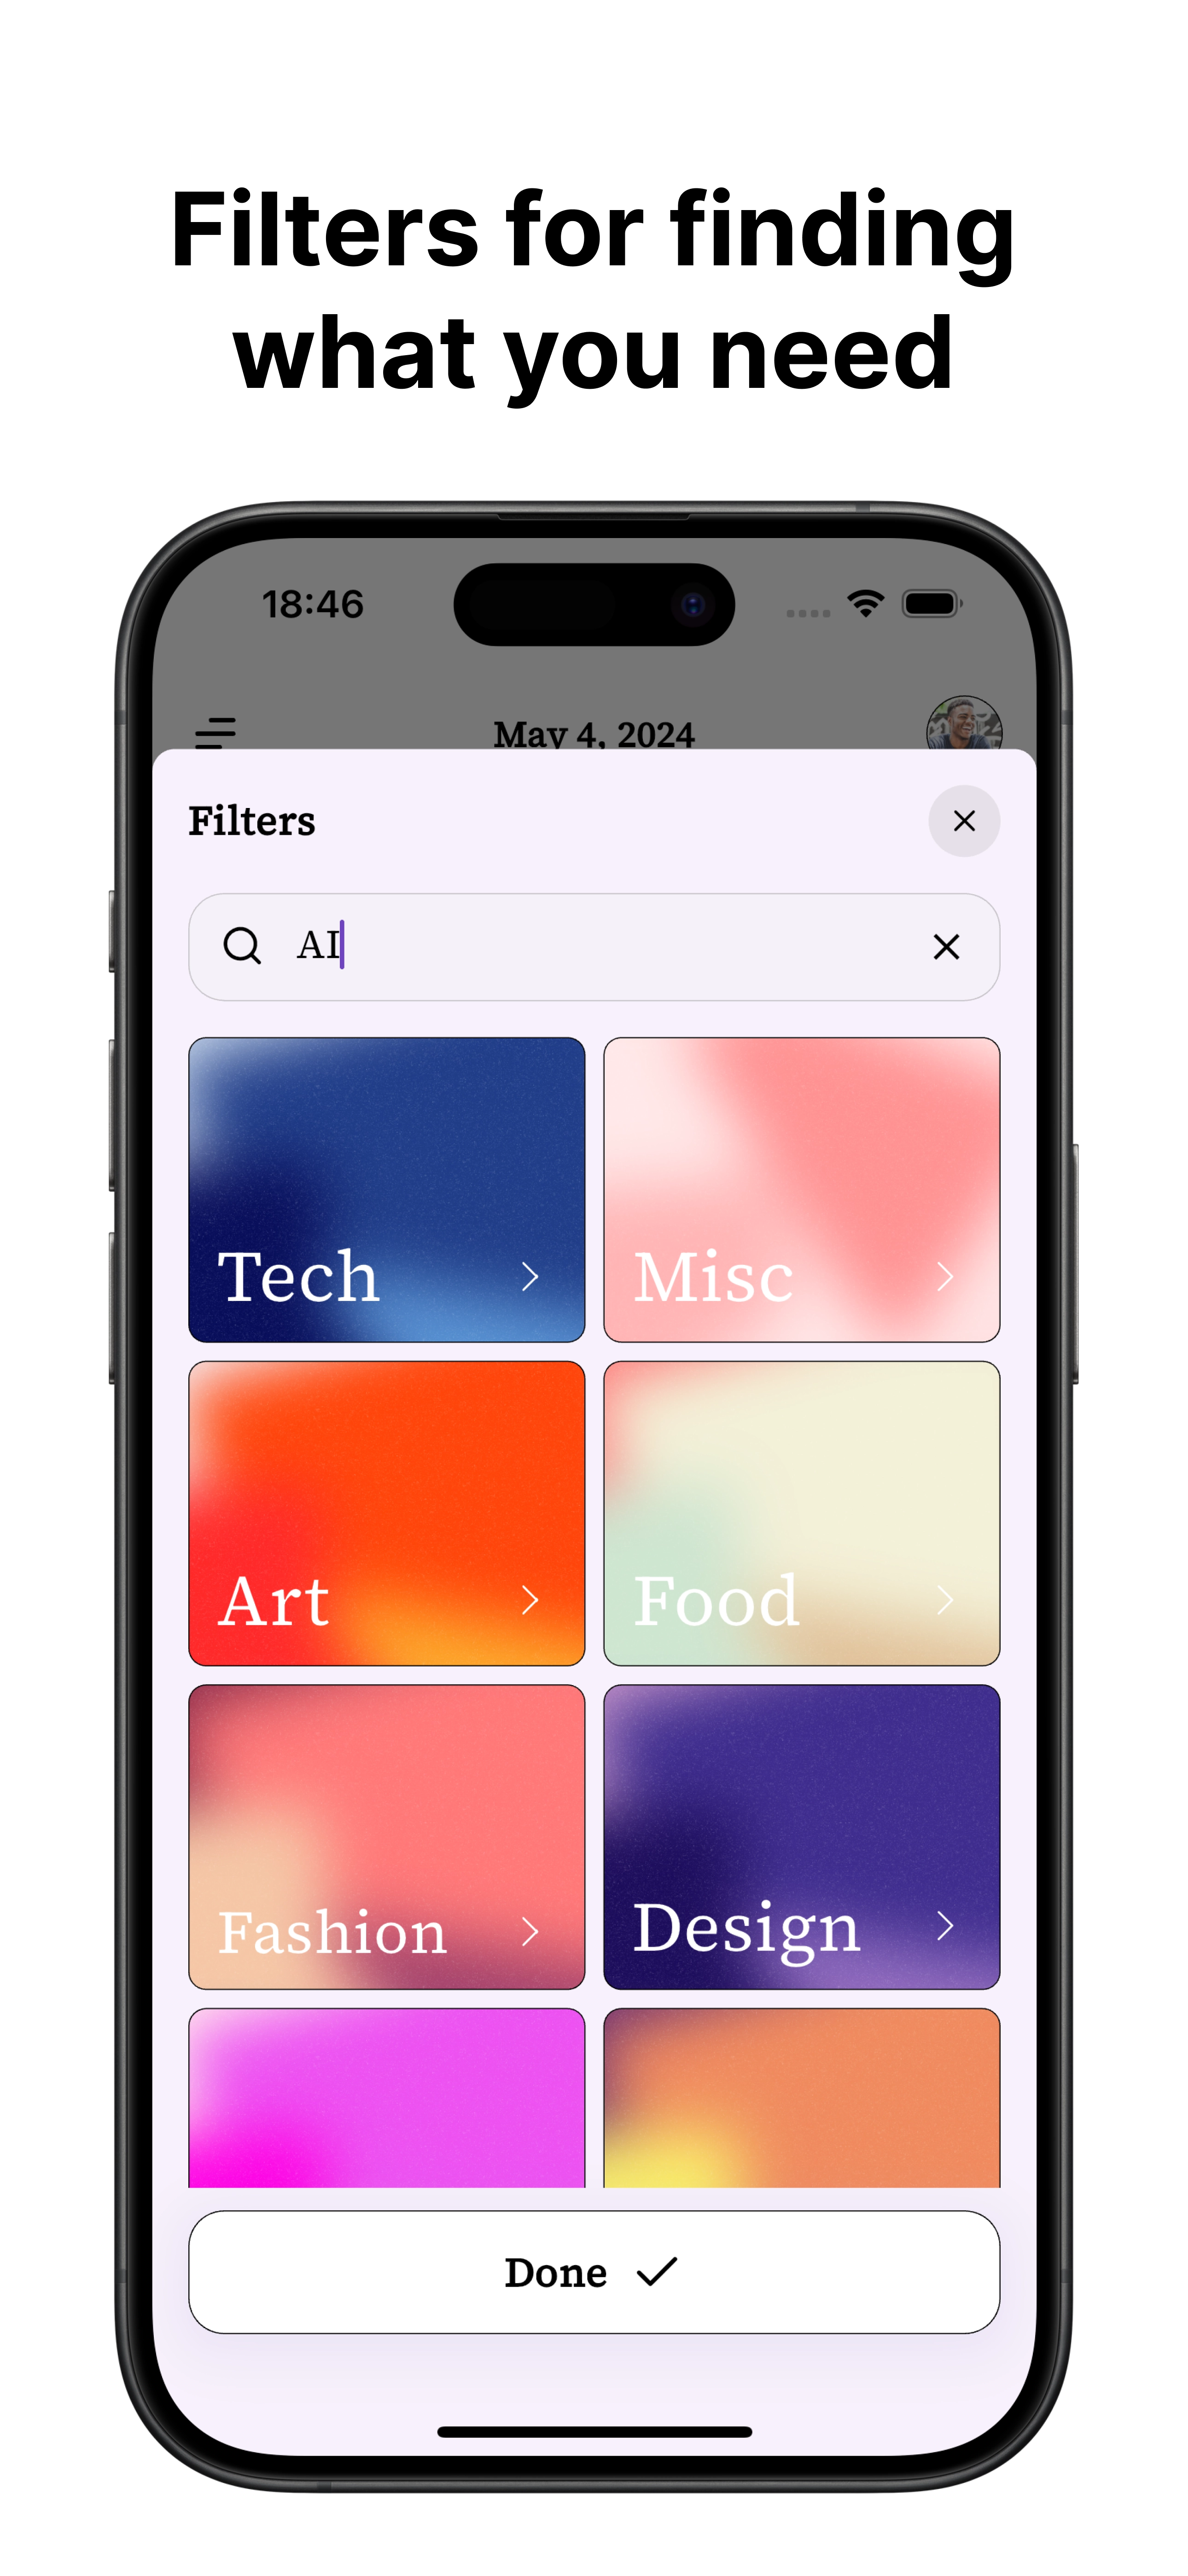 Filters for finding what you need